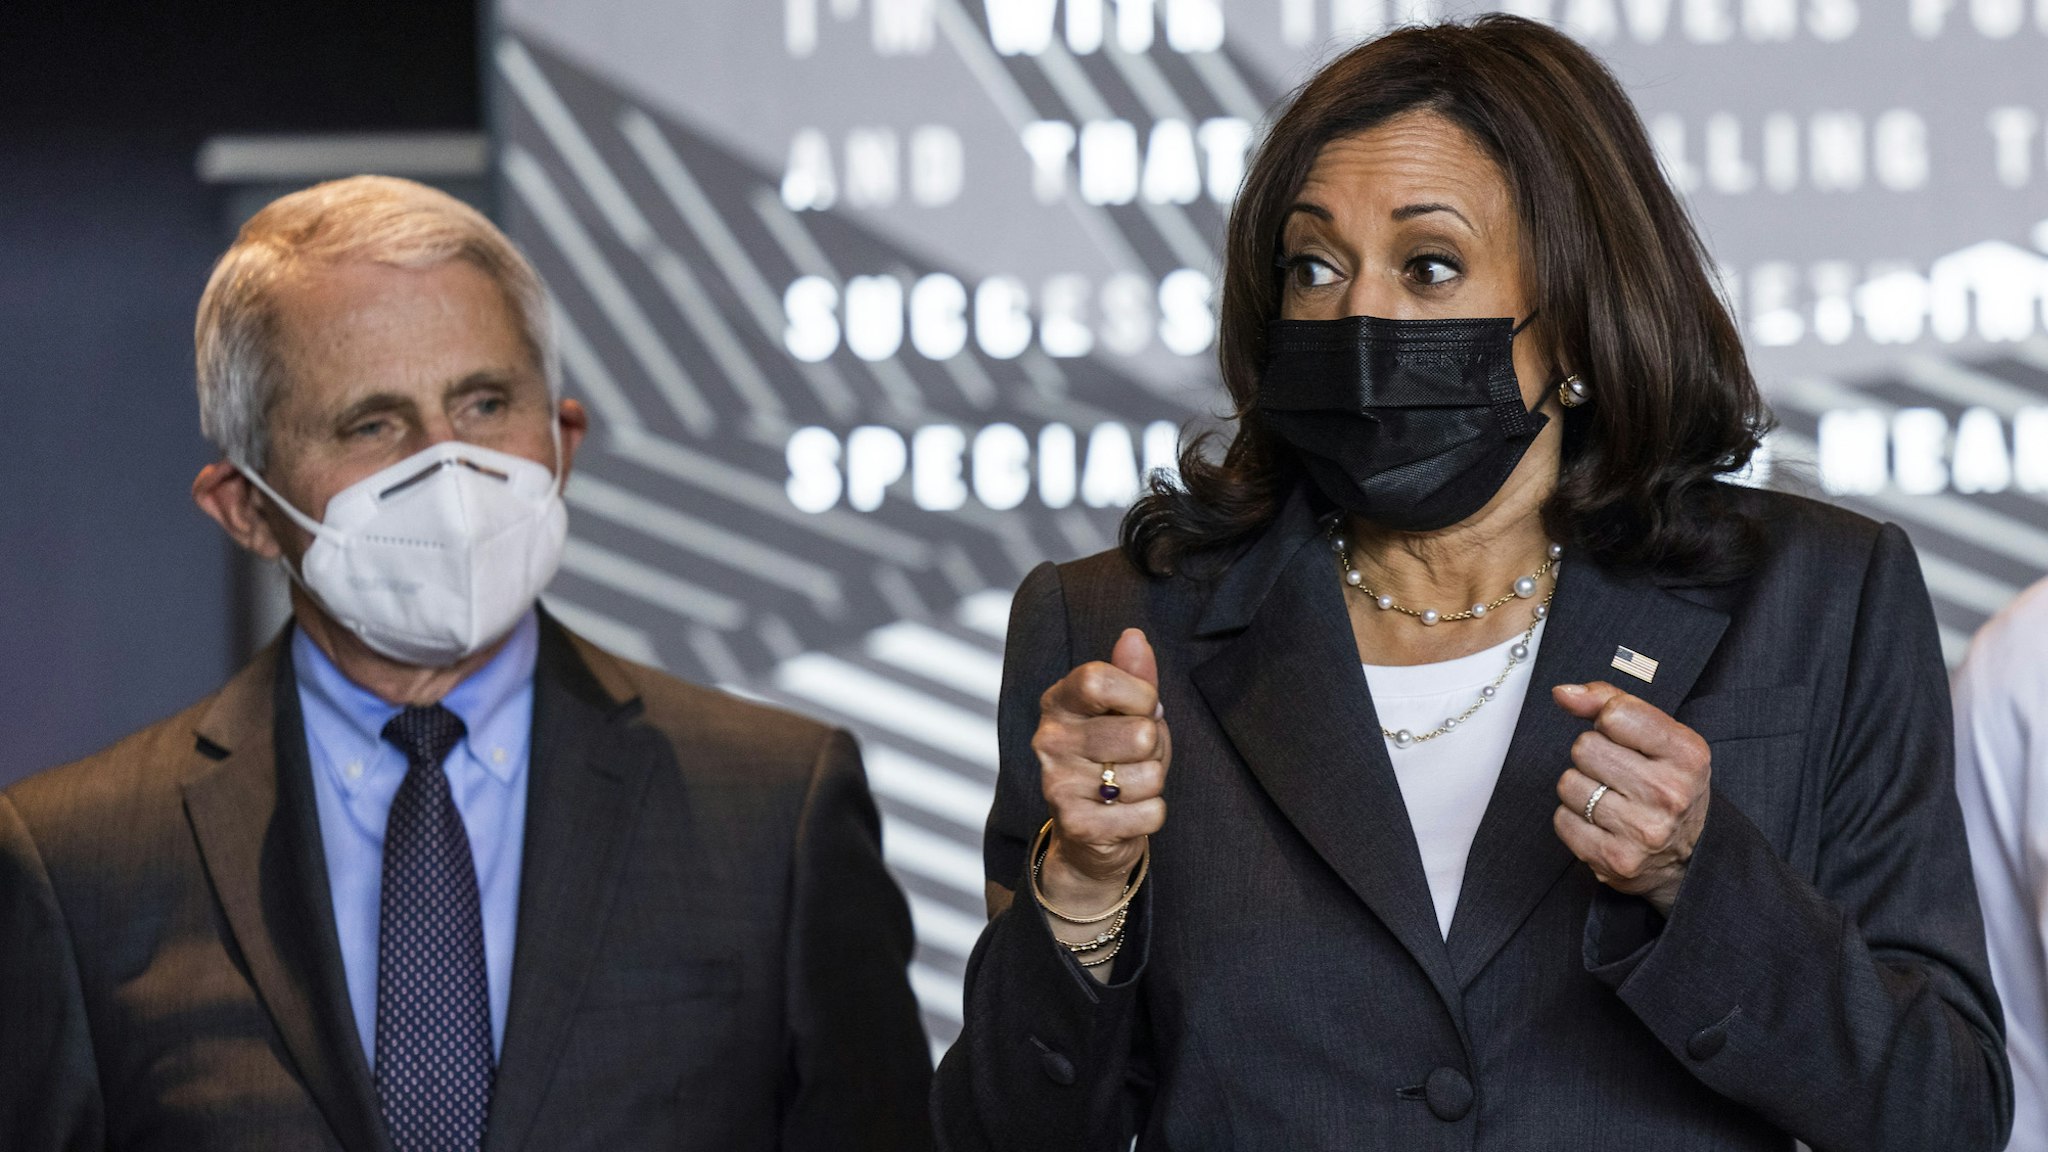 U.S. Vice President Kamala Harris, center, speaks alongside Anthony Fauci, director of the National Institute of Allergy and Infectious Diseases, and Dr. Jason Marx, right, during a tour a Covid-19 vaccination site at M&T Bank Stadium in Baltimore, Maryland, U.S., on Thursday, April 29, 2021.